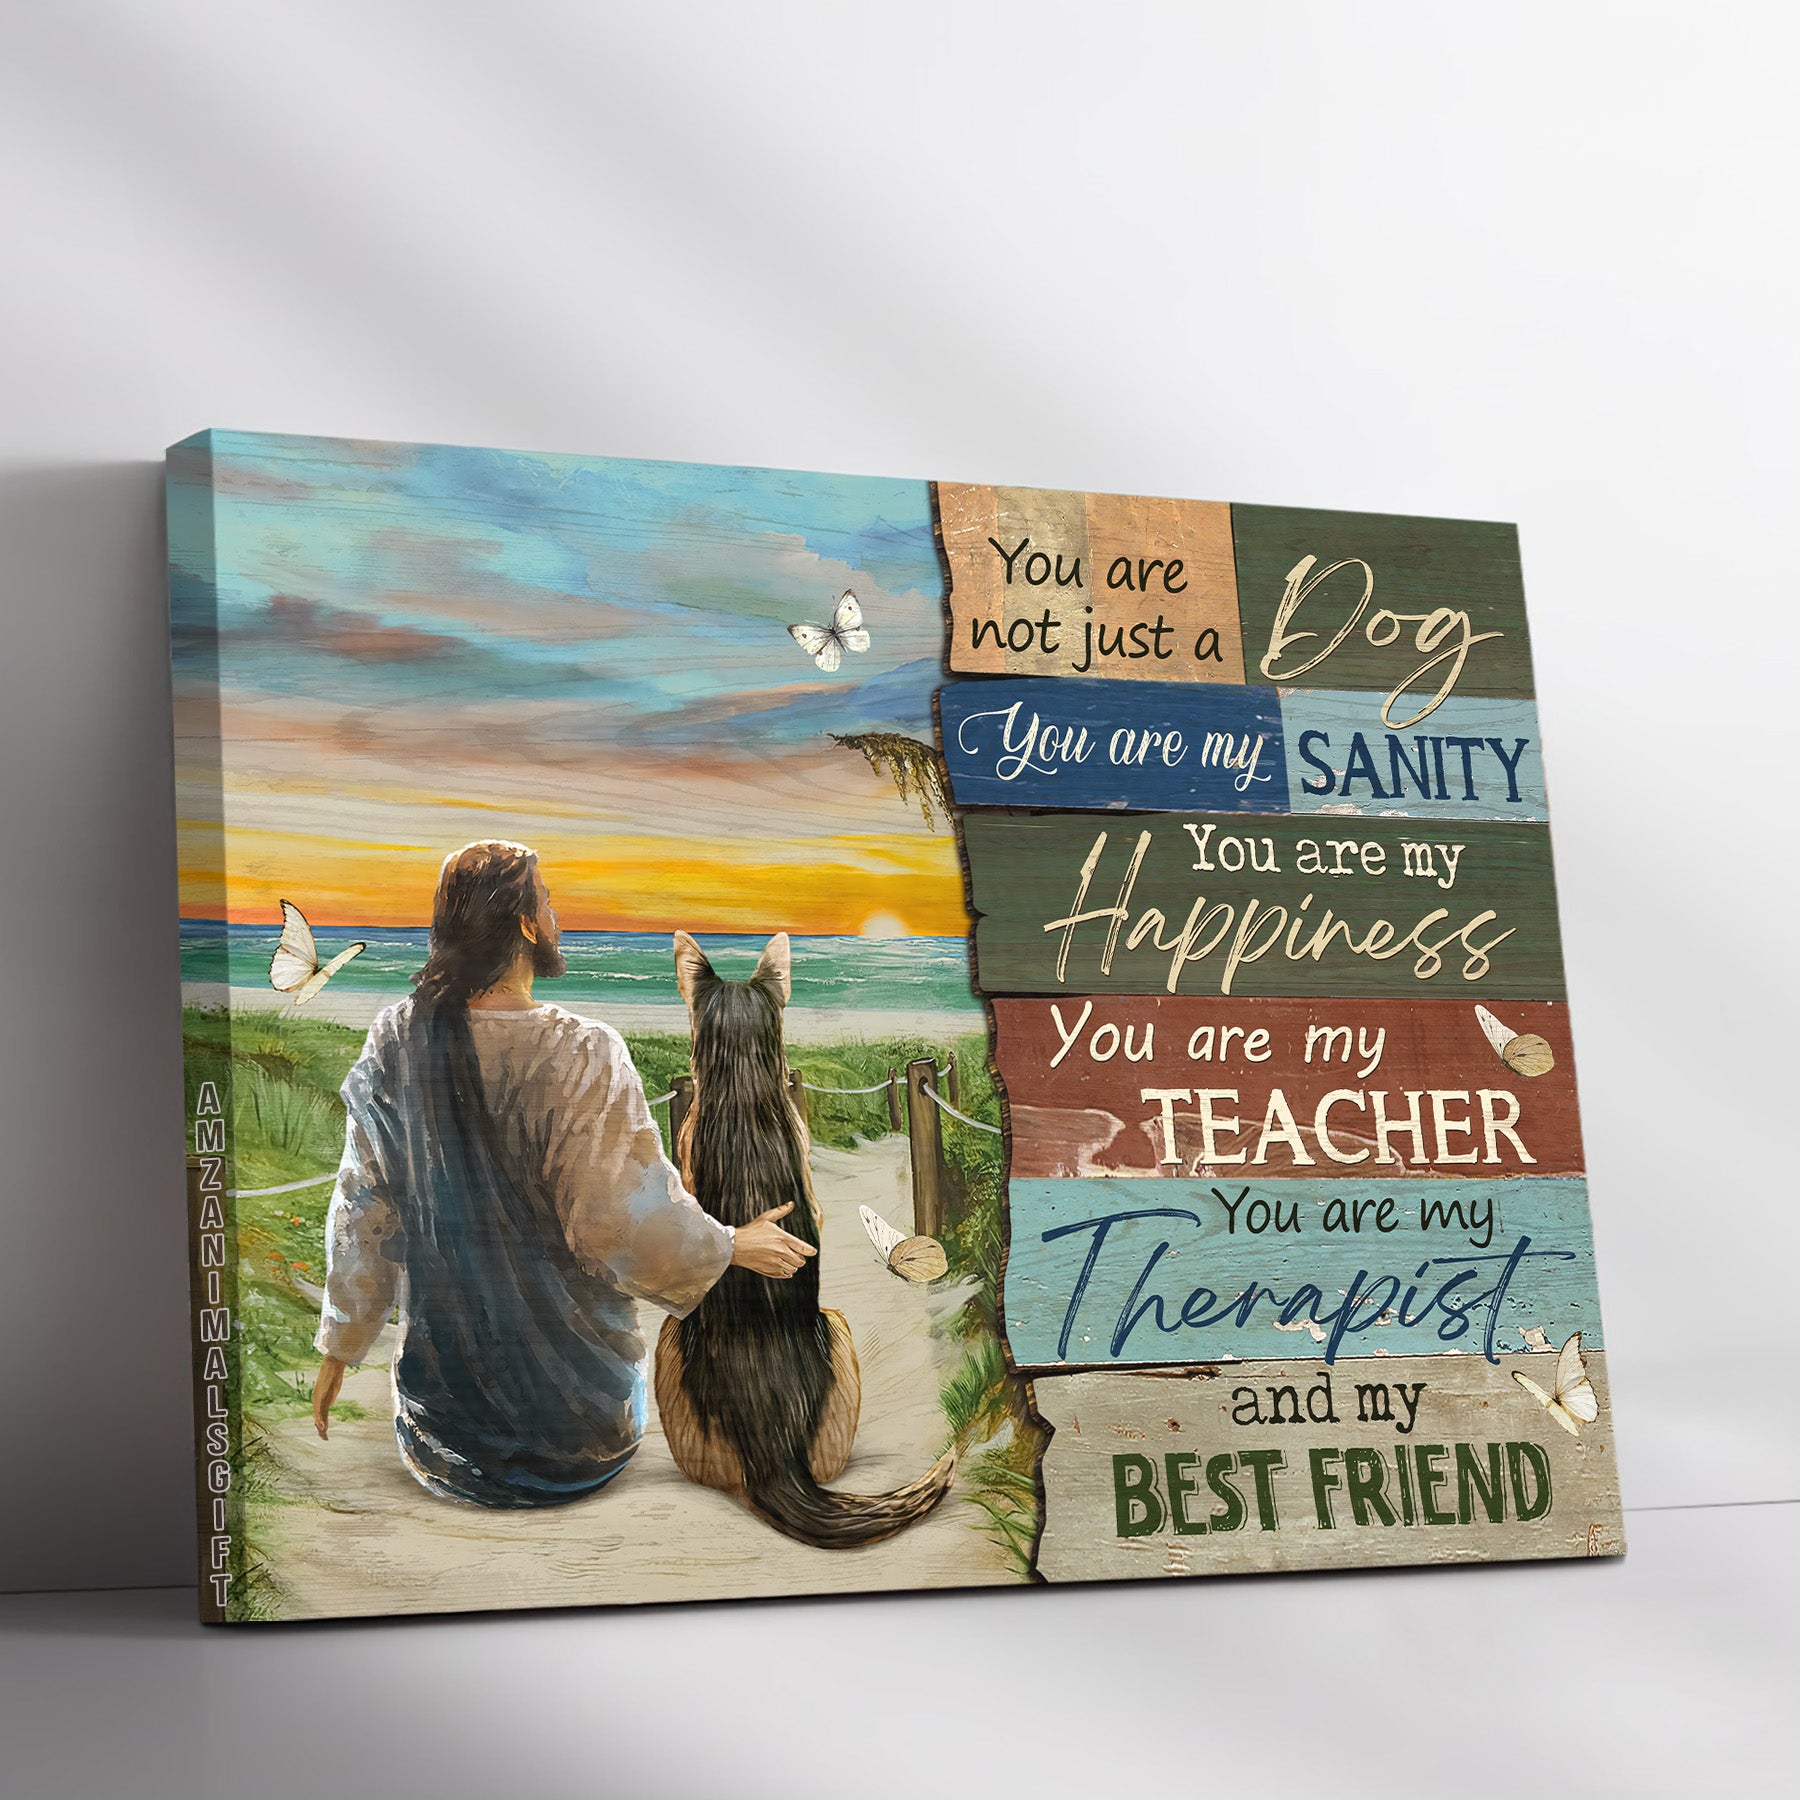 German Shepherd & Jesus Premium Wrapped Landscape Canvas - Jesus, German Shepherd, Ocean View, You Are Not Just A Dog - Perfect Gift For Christian